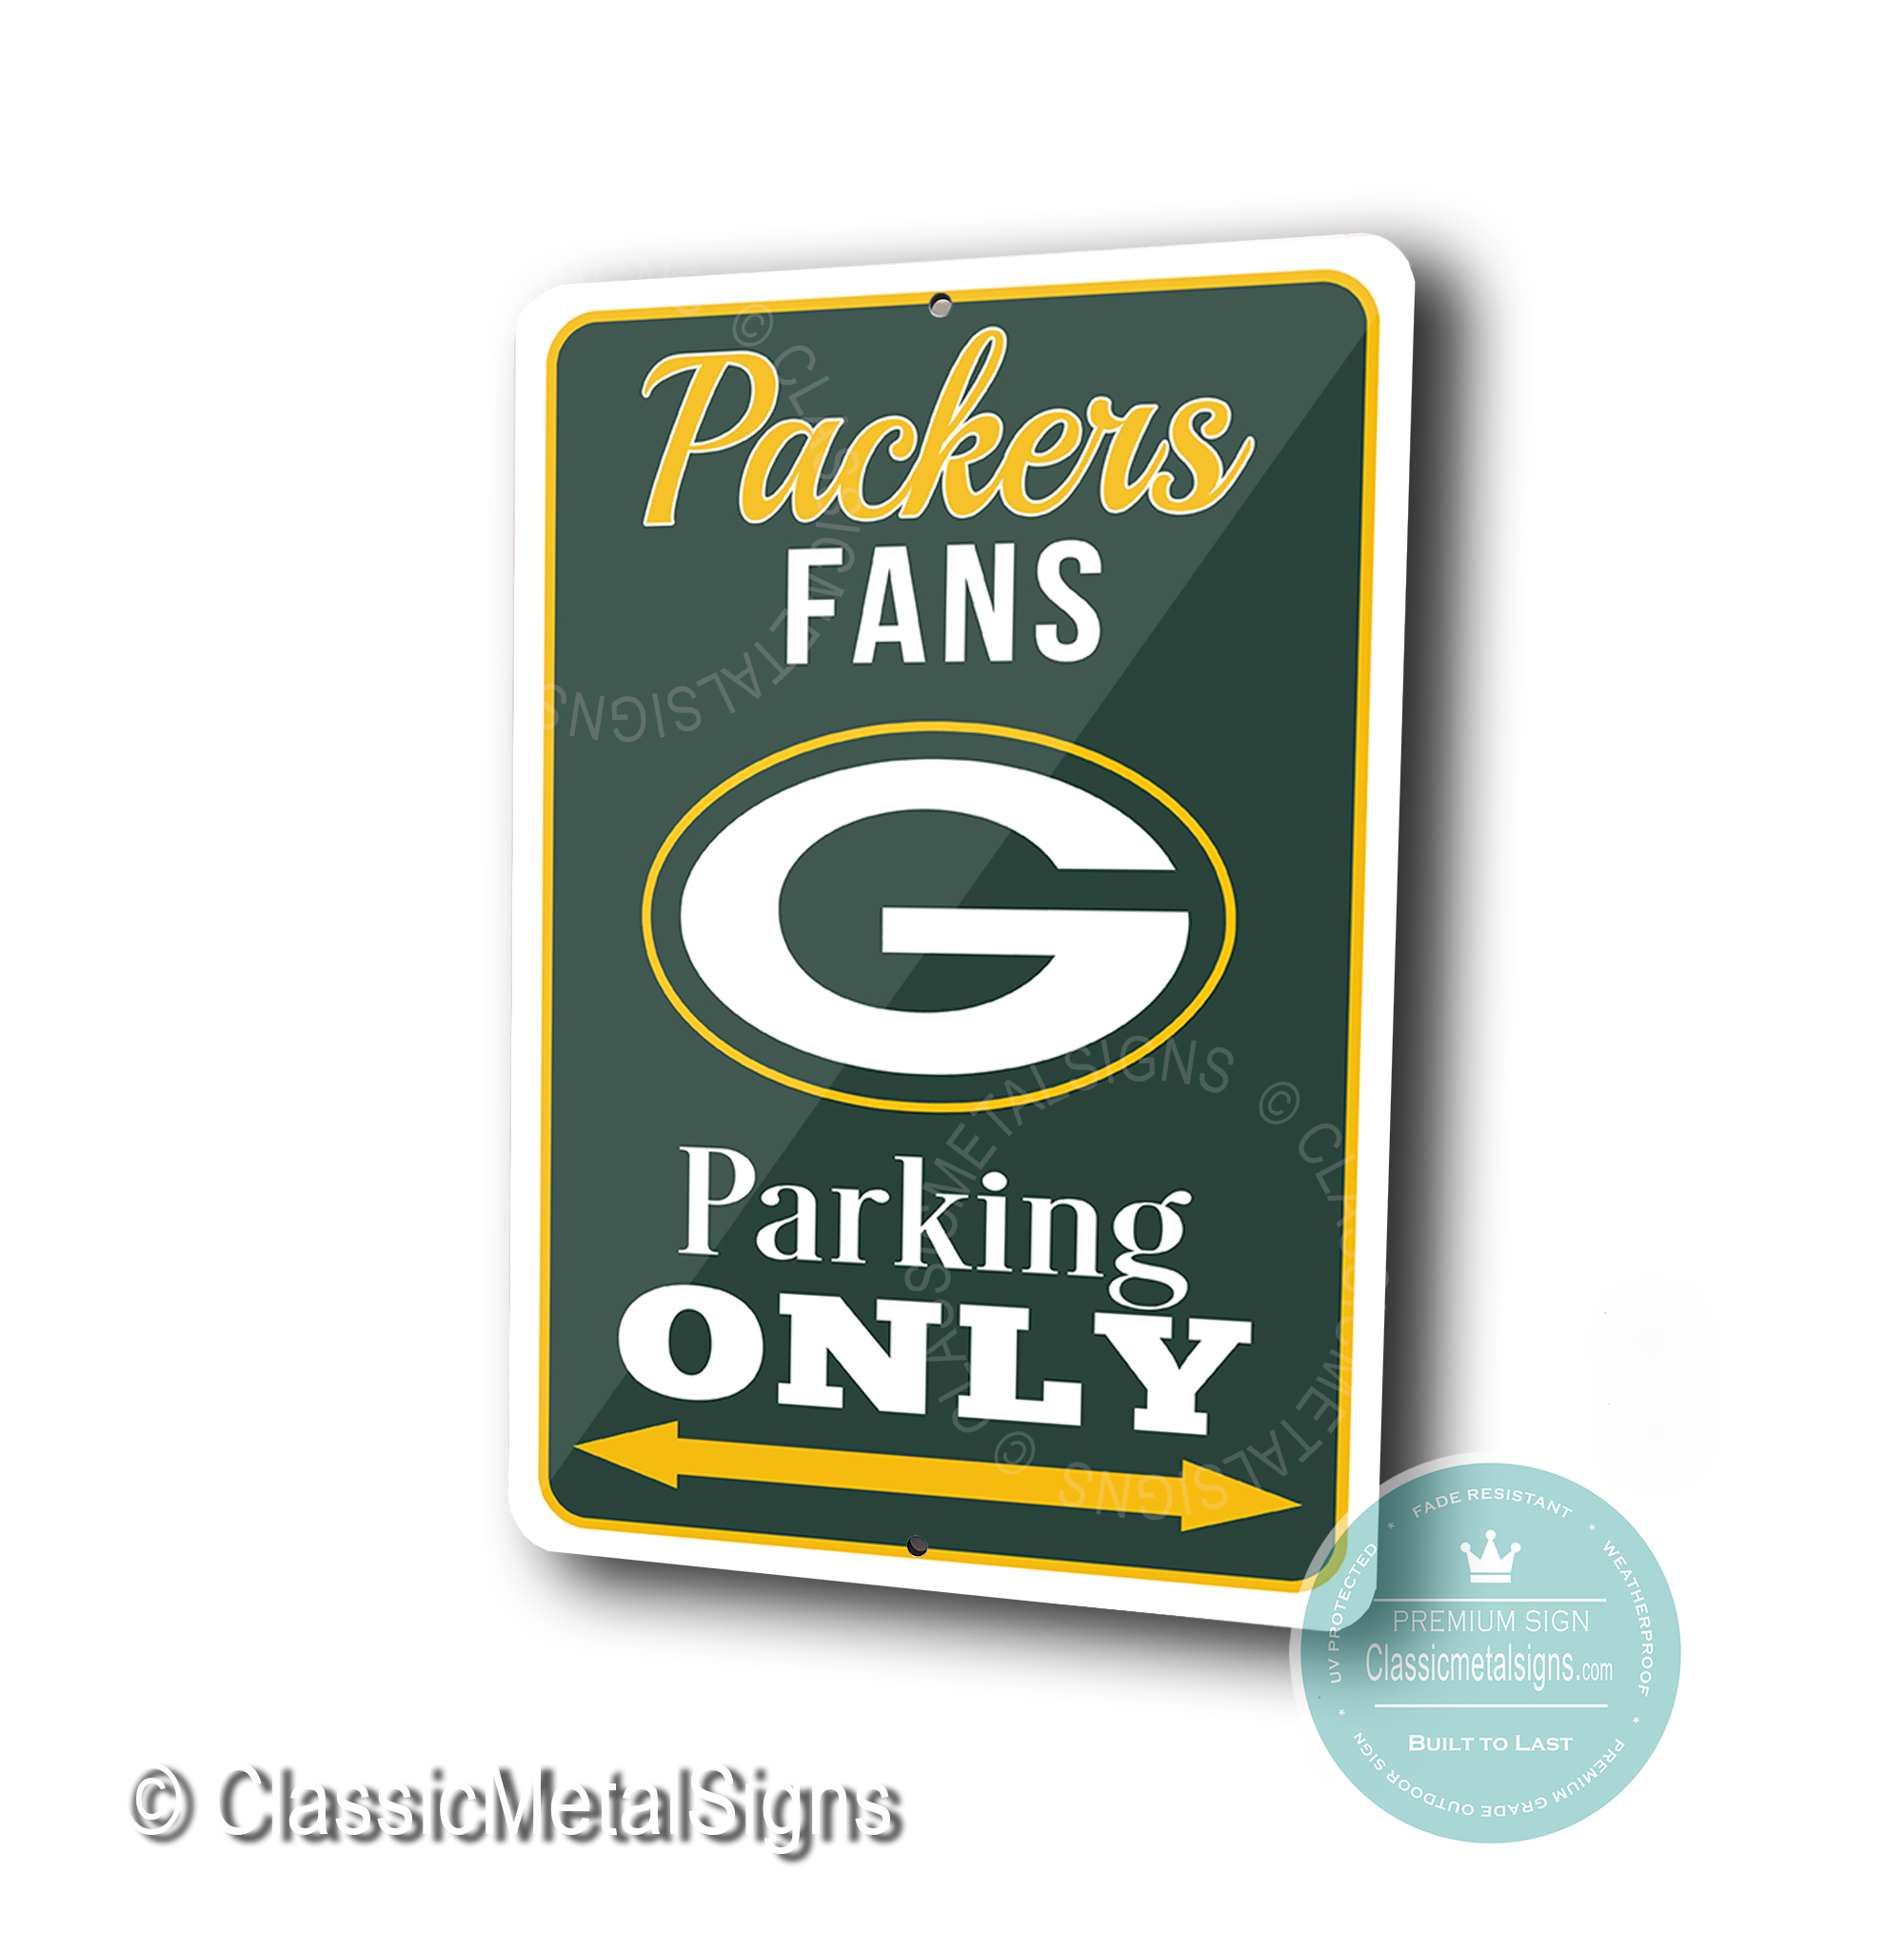 green bay packers parking